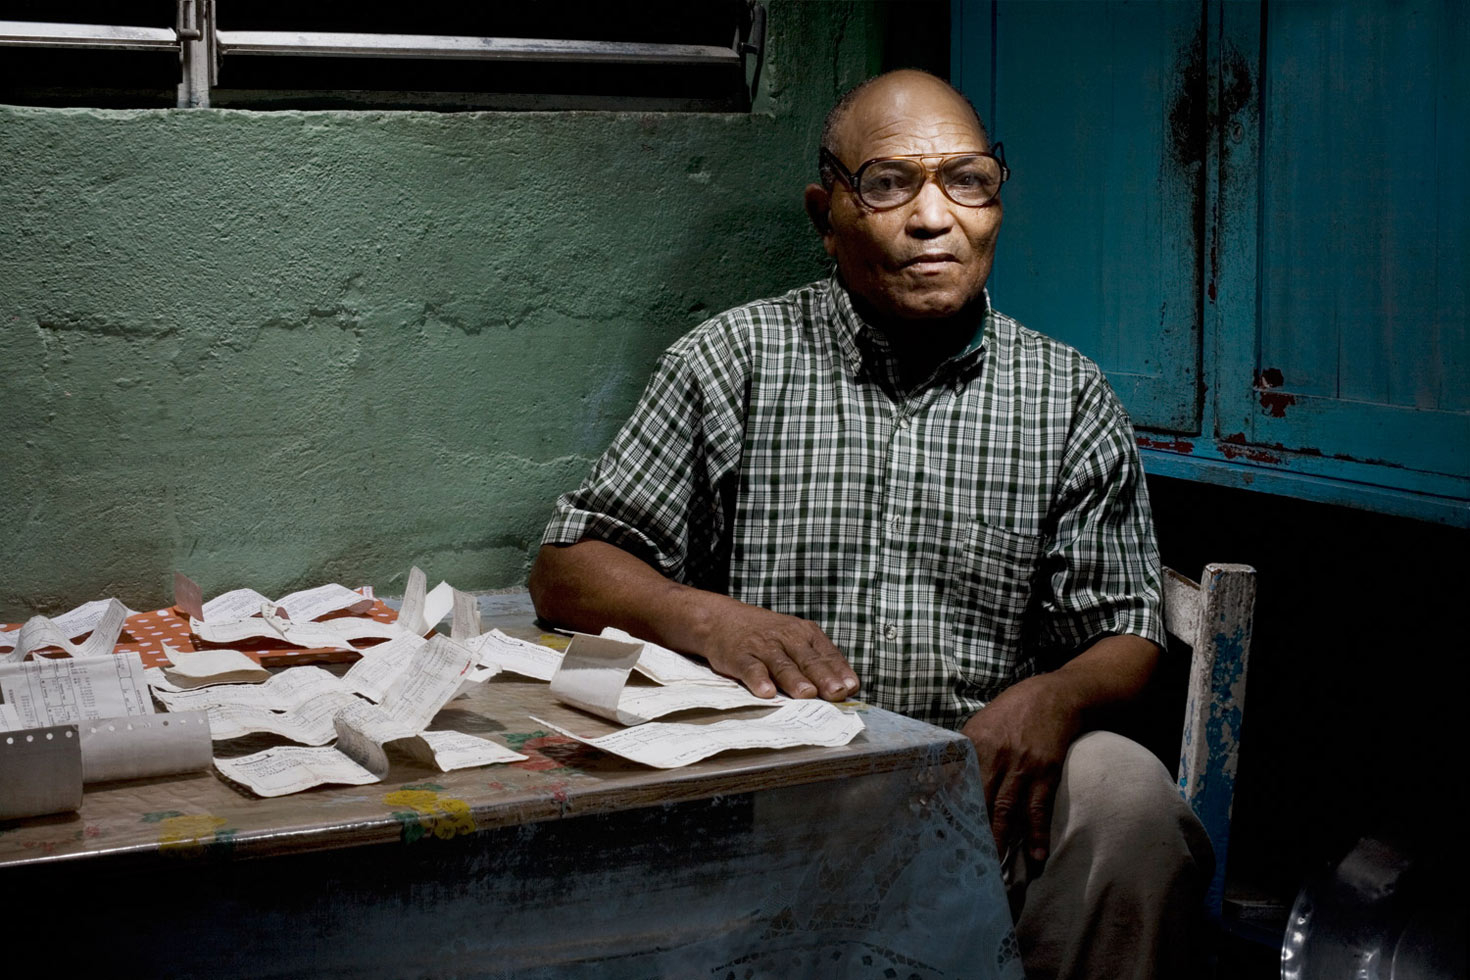 A few years ago, the sugar cane industry offered lifetime pensions to anyone who saved more than 350 pay-stubs during their working lives. Here, Chi Chi proudly shows some of the pay-stubs he saved. He was the only person in the Batey to have saved more than 350, which earned him and his wife, Sonia, a monthly pension of 2,985 pesos.